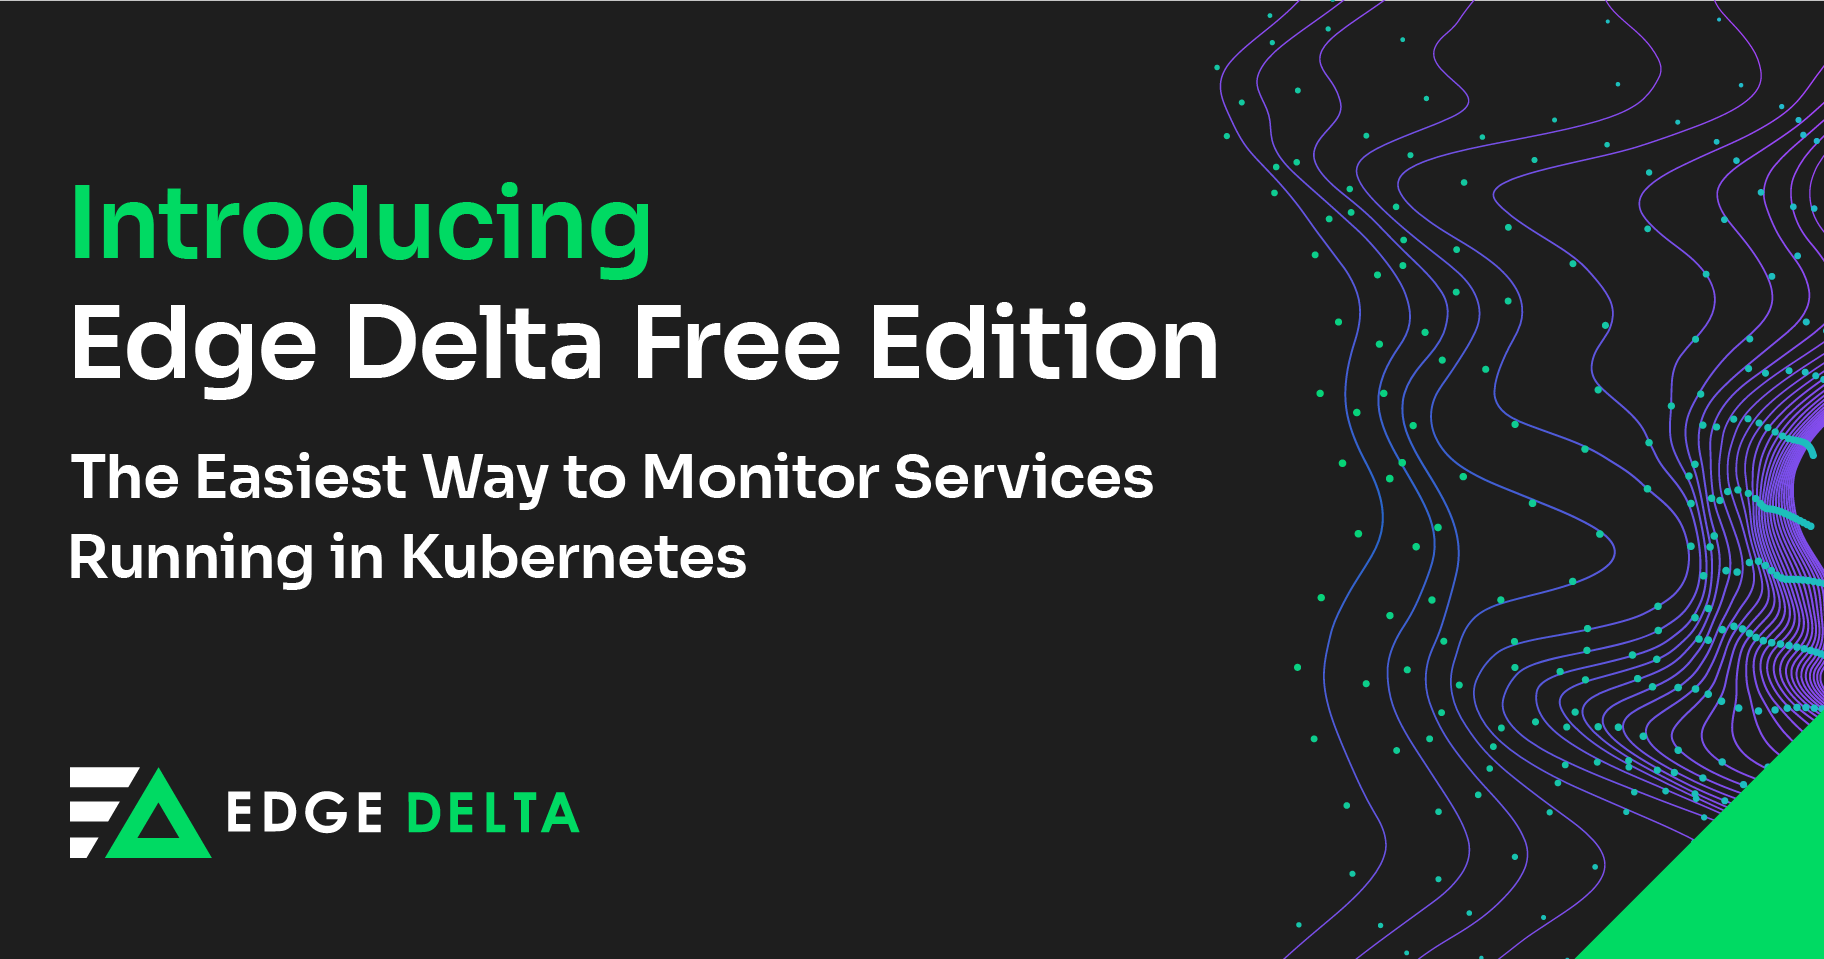 Introducing Edge Delta Free Edition: The Easiest Way to Monitor Services Running in Kubernetes